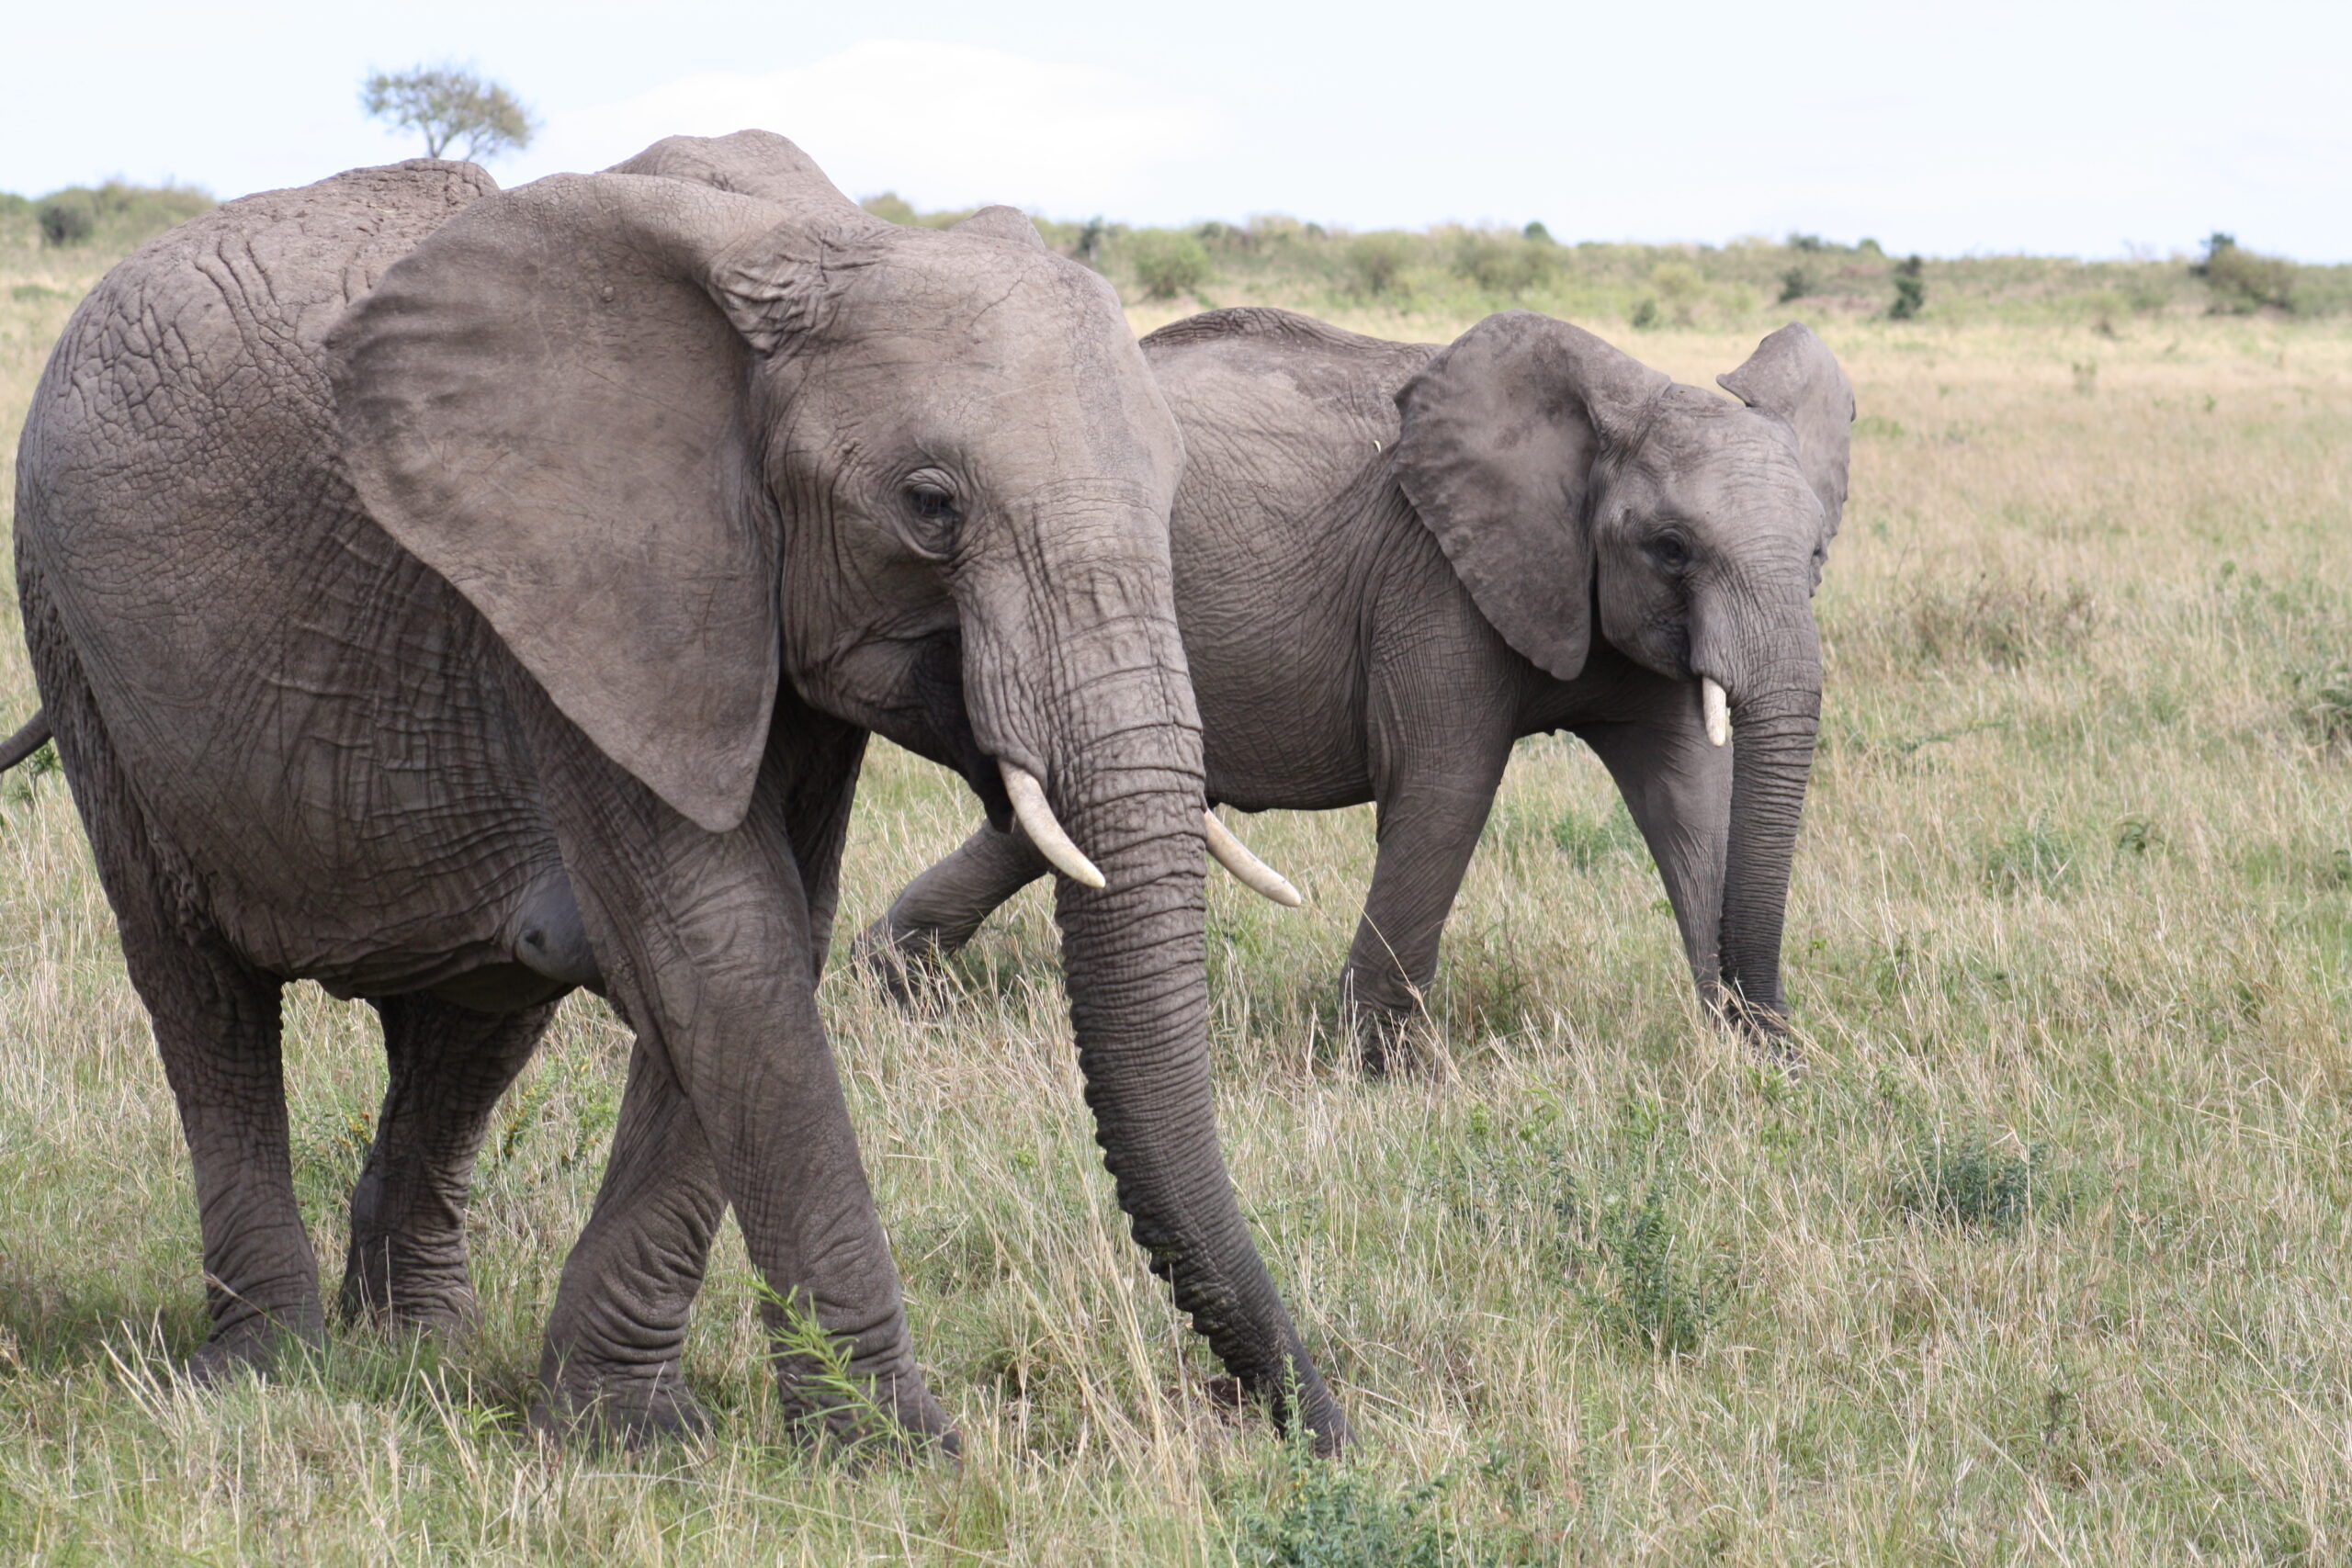 Elephants Able To Detect Rainstorms 150 Miles Away